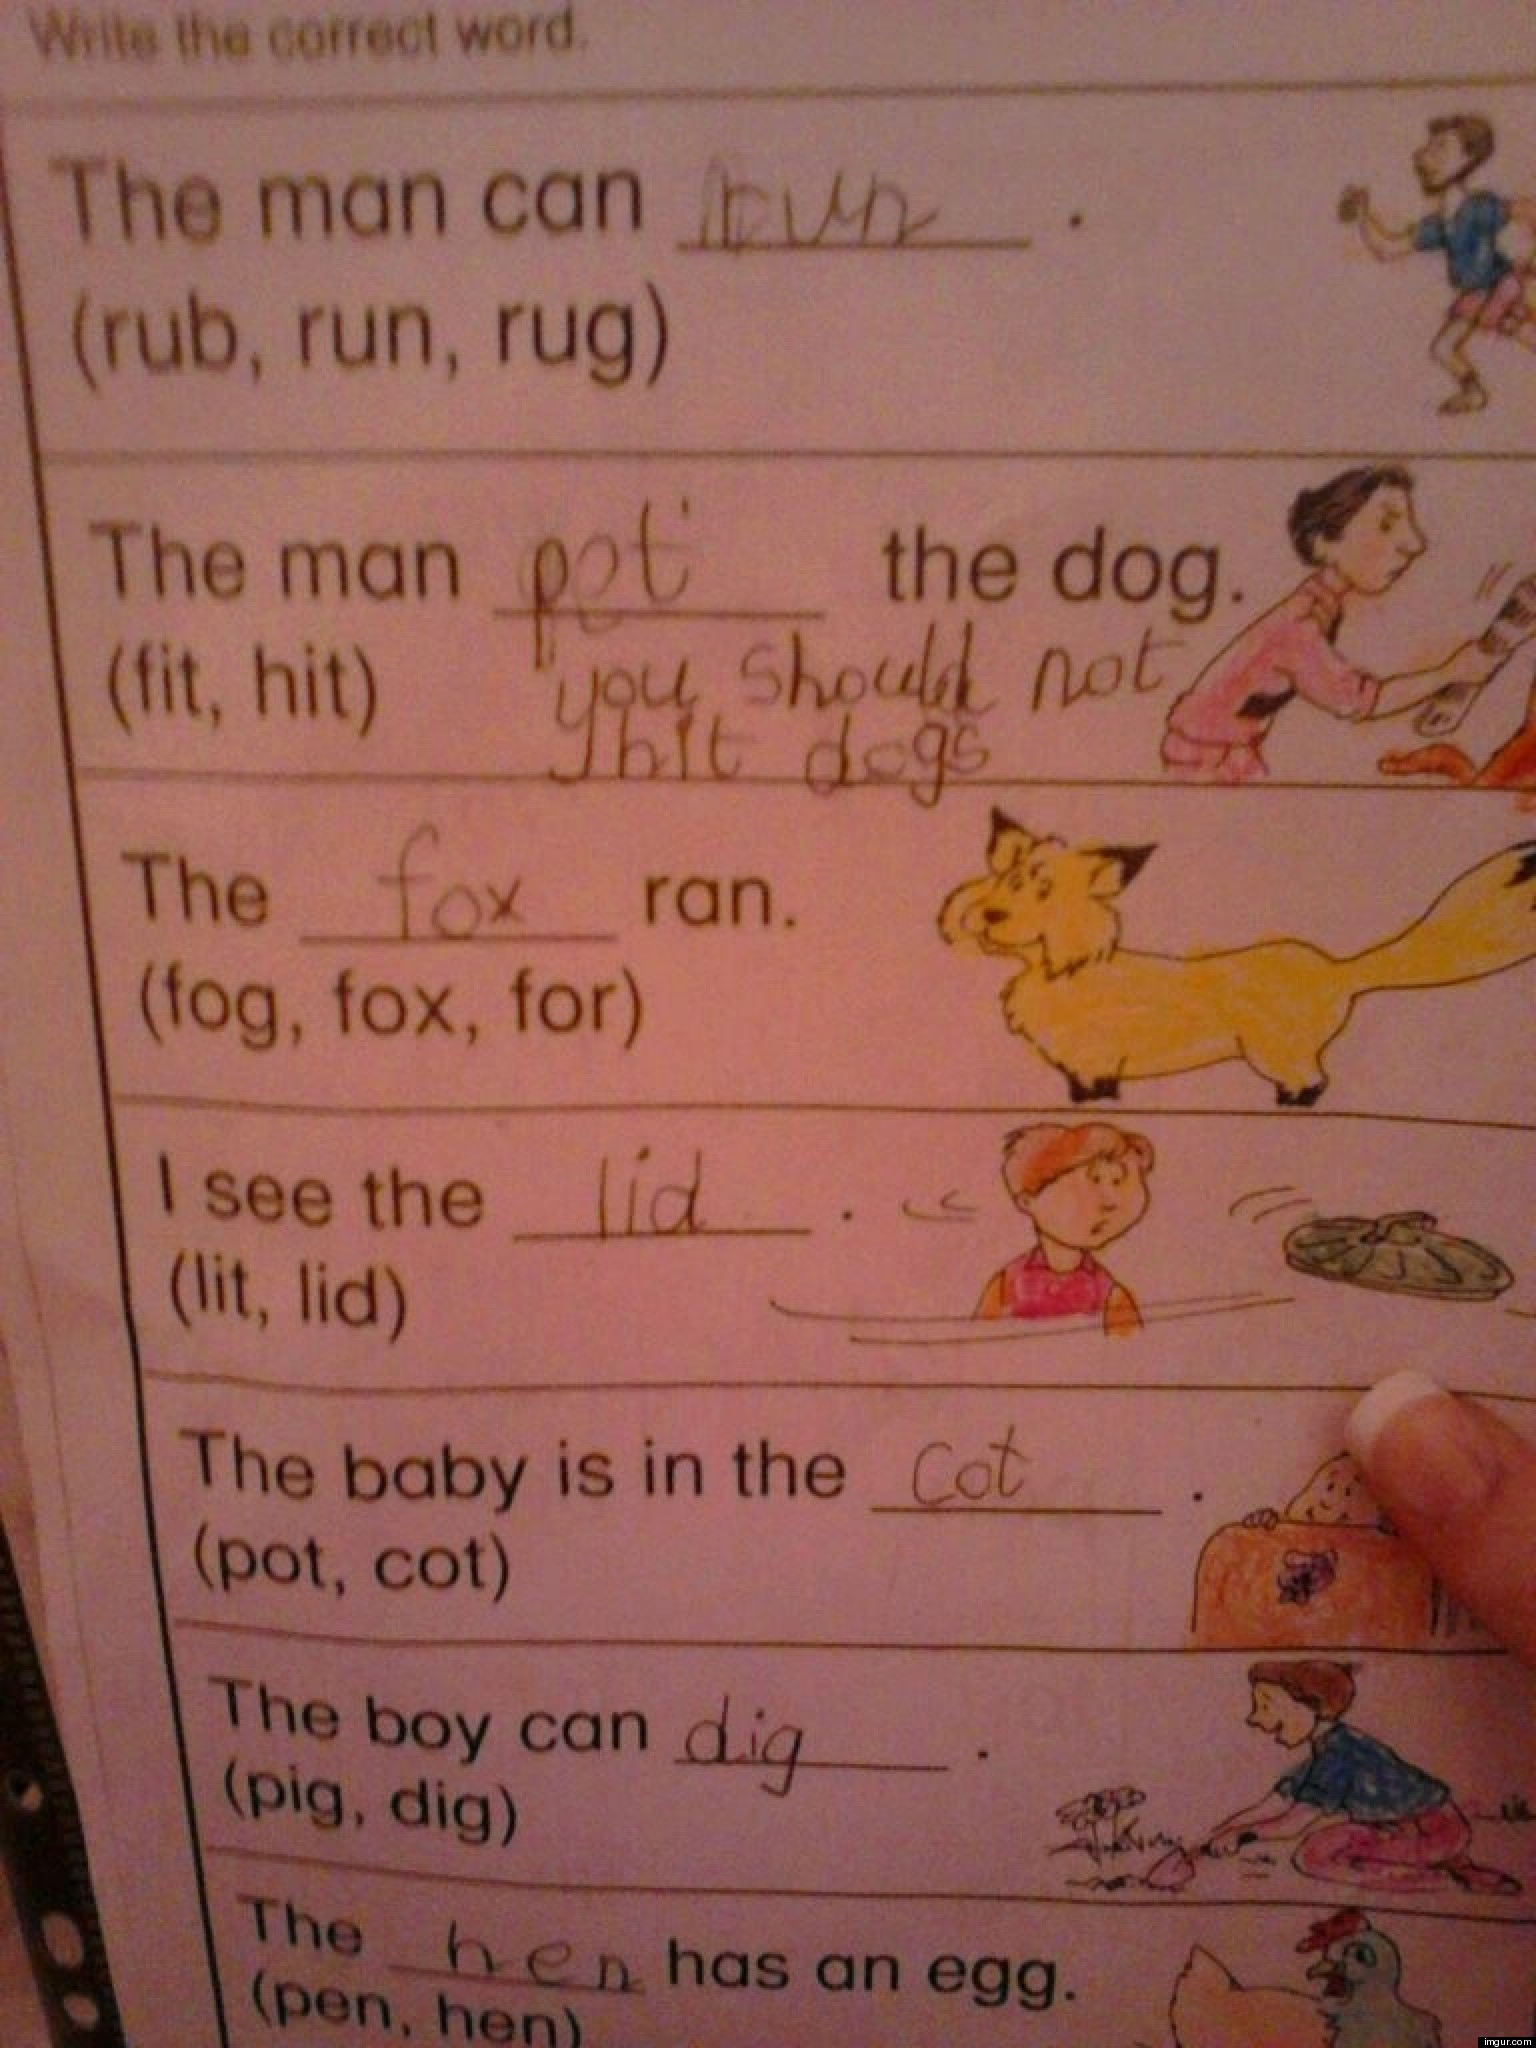 Cute Kid Note Of The Day: 'You Should Not Hit Dogs' | HuffPost